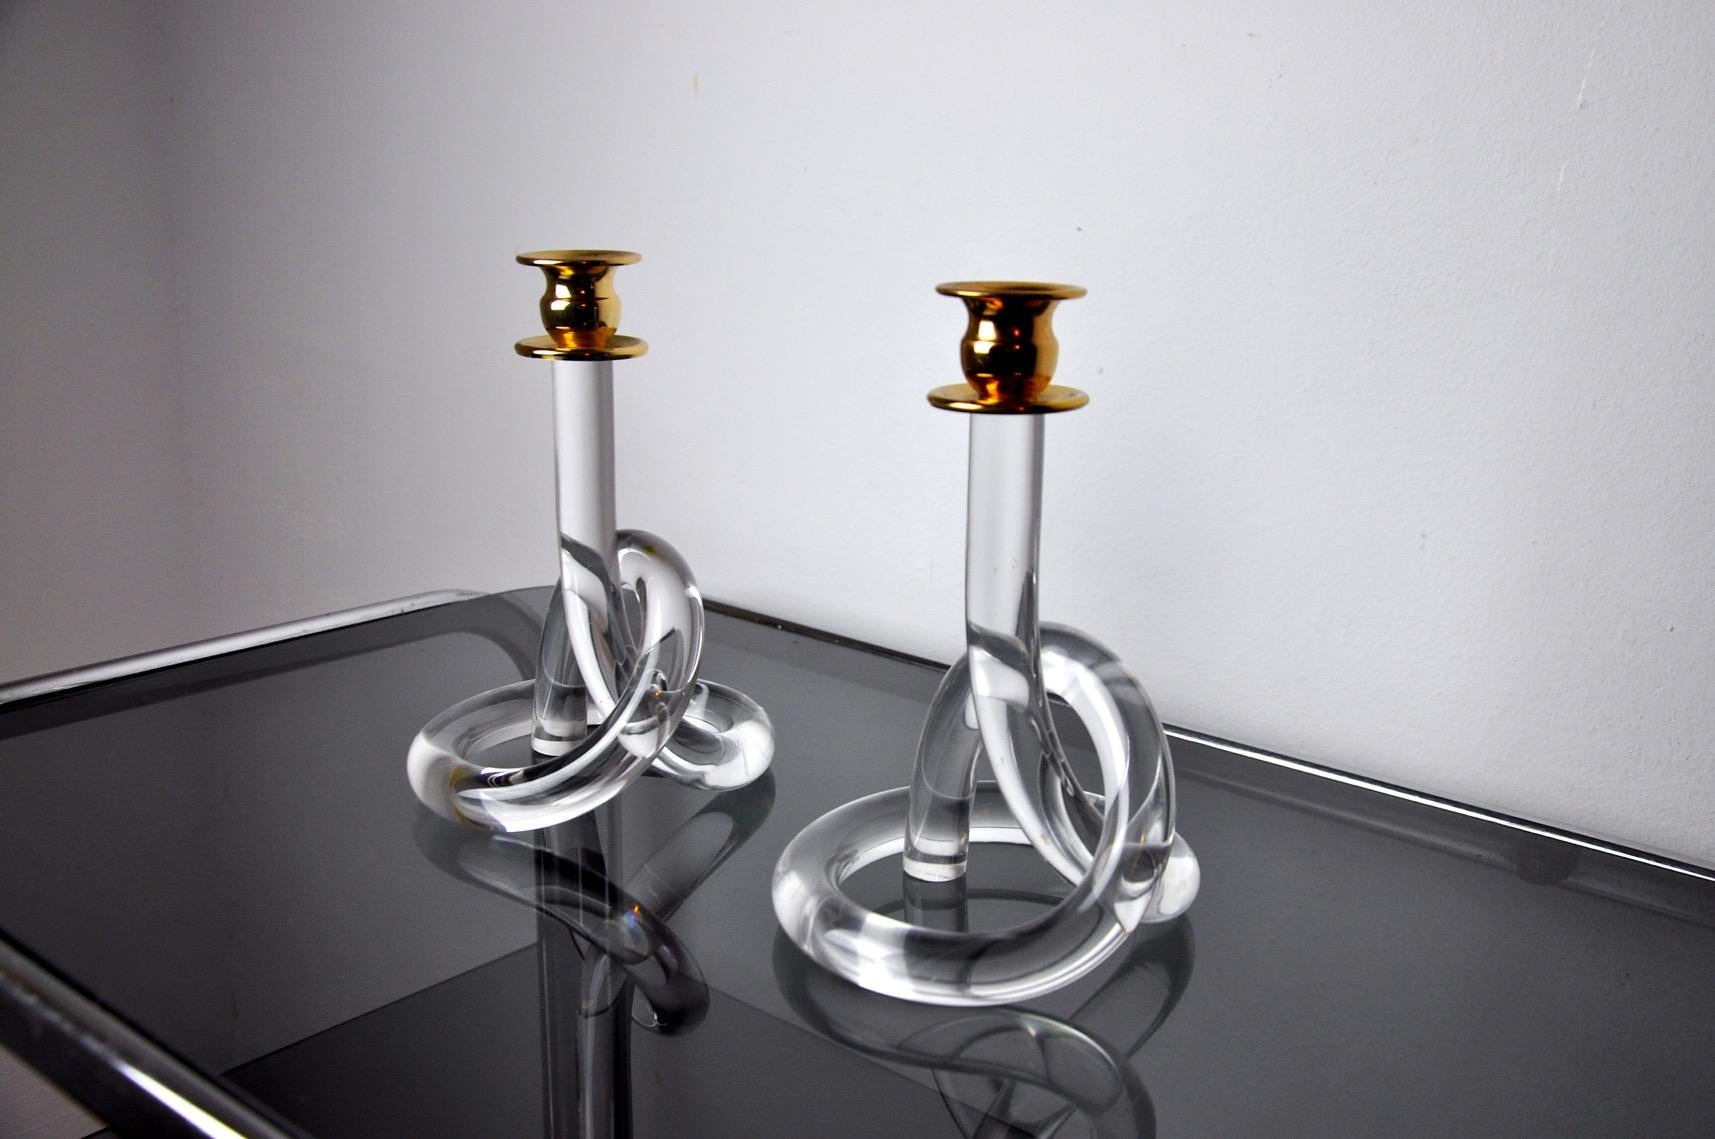 Pair of Lucite Dorothy Thorpe candle holders designed and produced in the 1970's. Pretzel shaped gold colored brass holder designed by Elaine Bscheider. Superb design and vintage object to decorate your interior. 

 